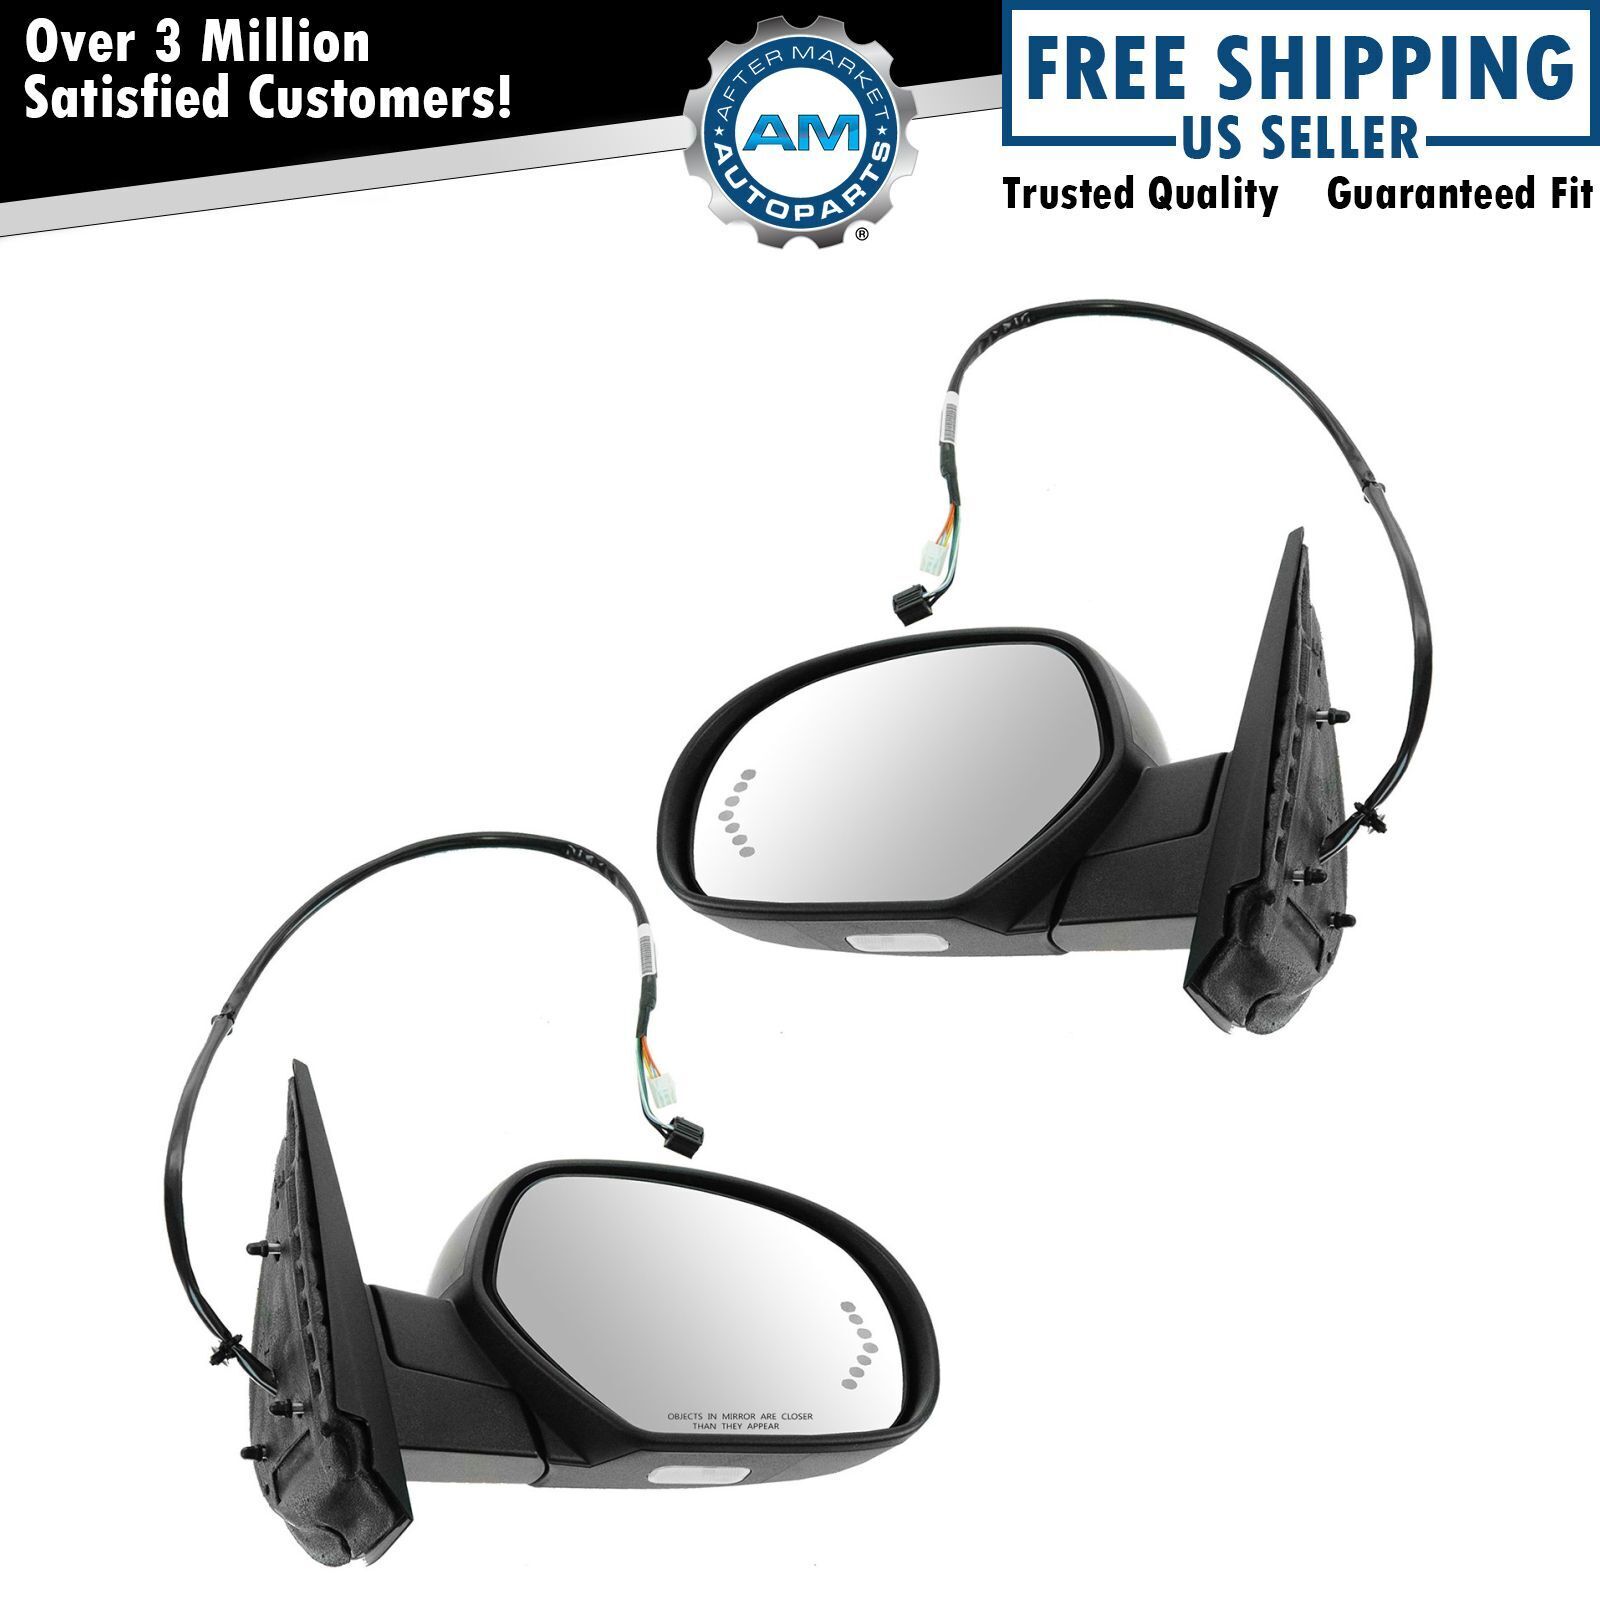 Mirrors Power Heated Signal Puddle Pair Set for Chevy GMC Pickup SUV